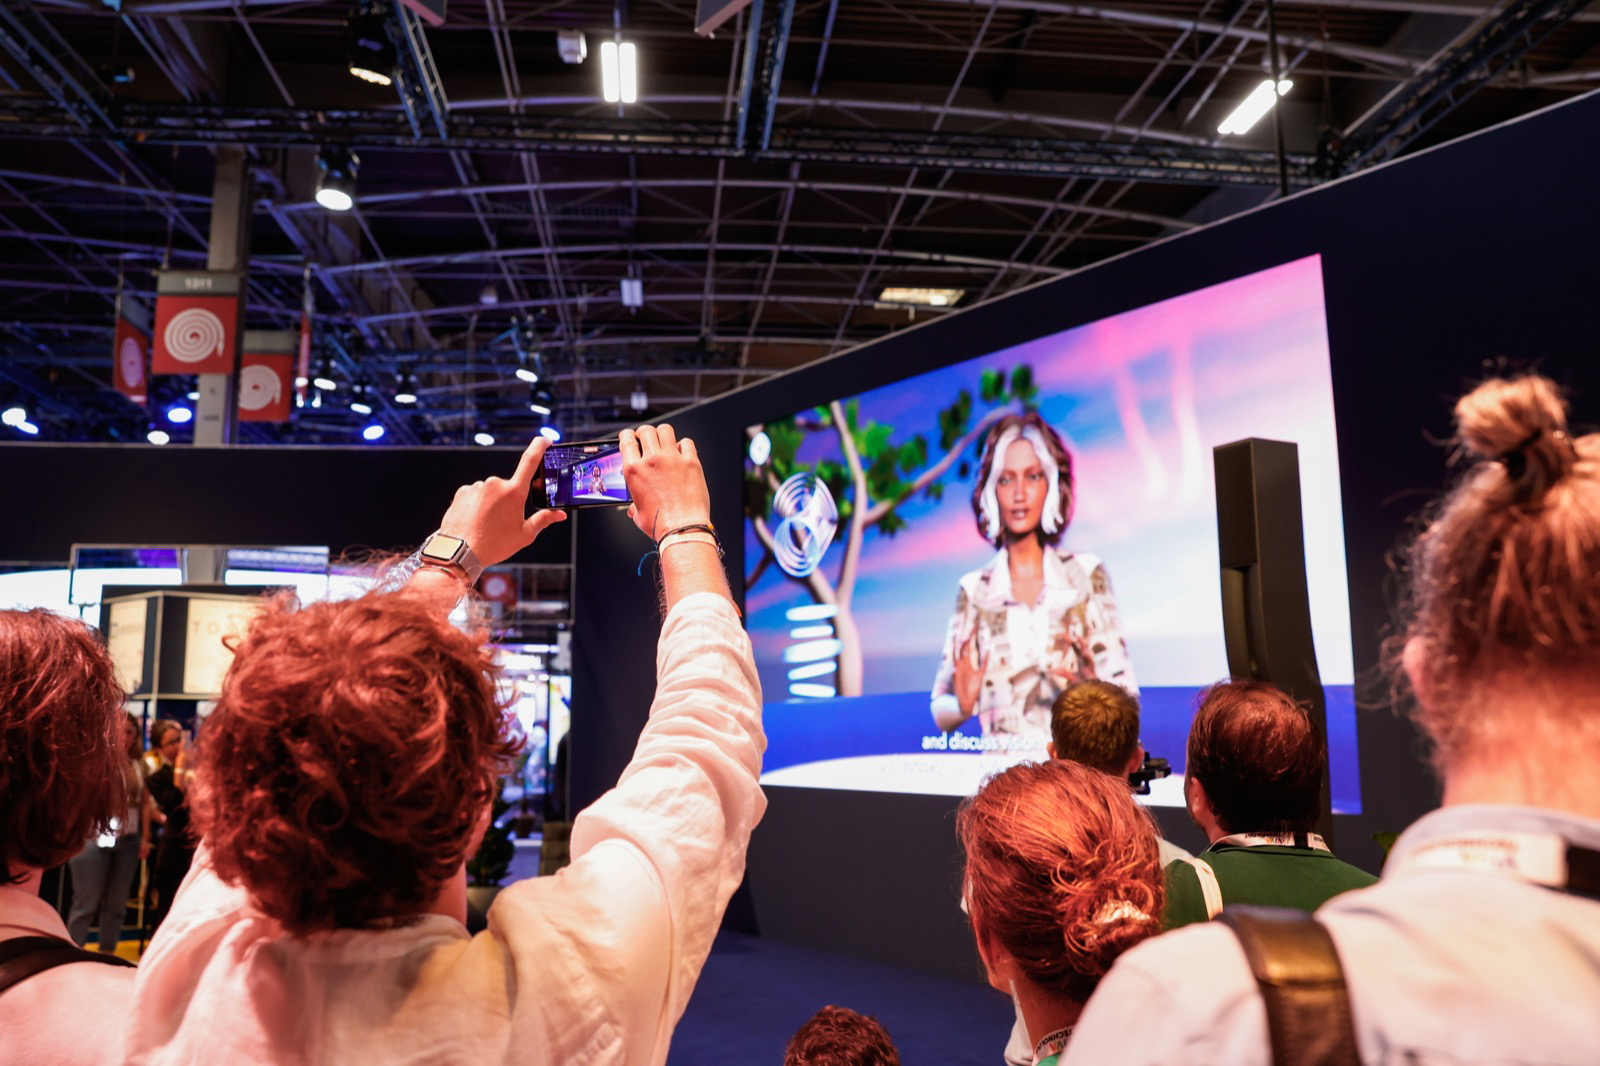 LVMH on X: It's a wrap for Day 1 at @VivaTech where the dream